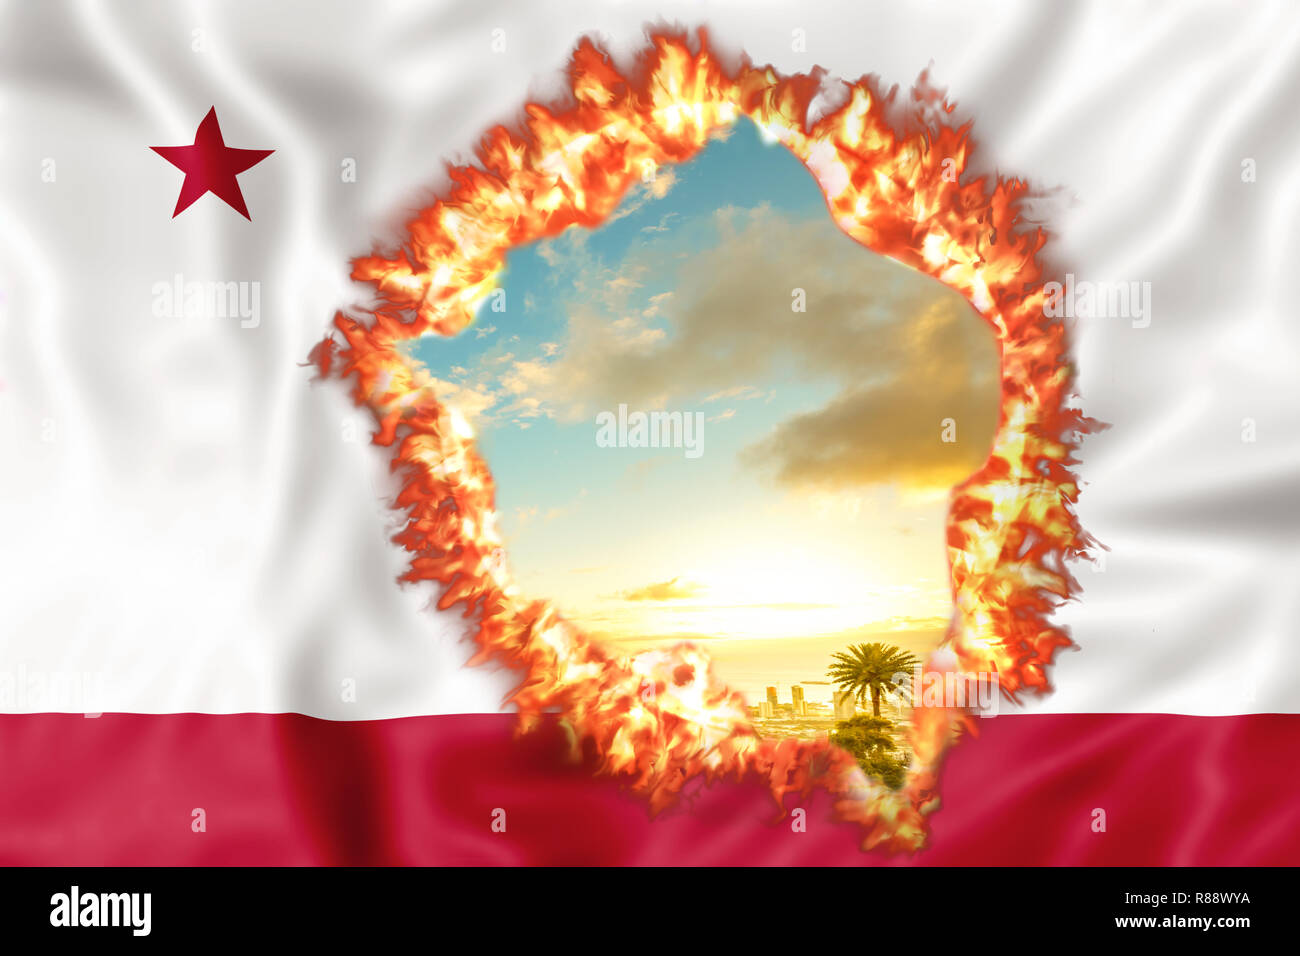 Fires in California in 2018. California Republic Flag on fire with sky sunset background. The fire that is affecting California is considered the most devastating and deadly ever seen in the US state. Stock Photo